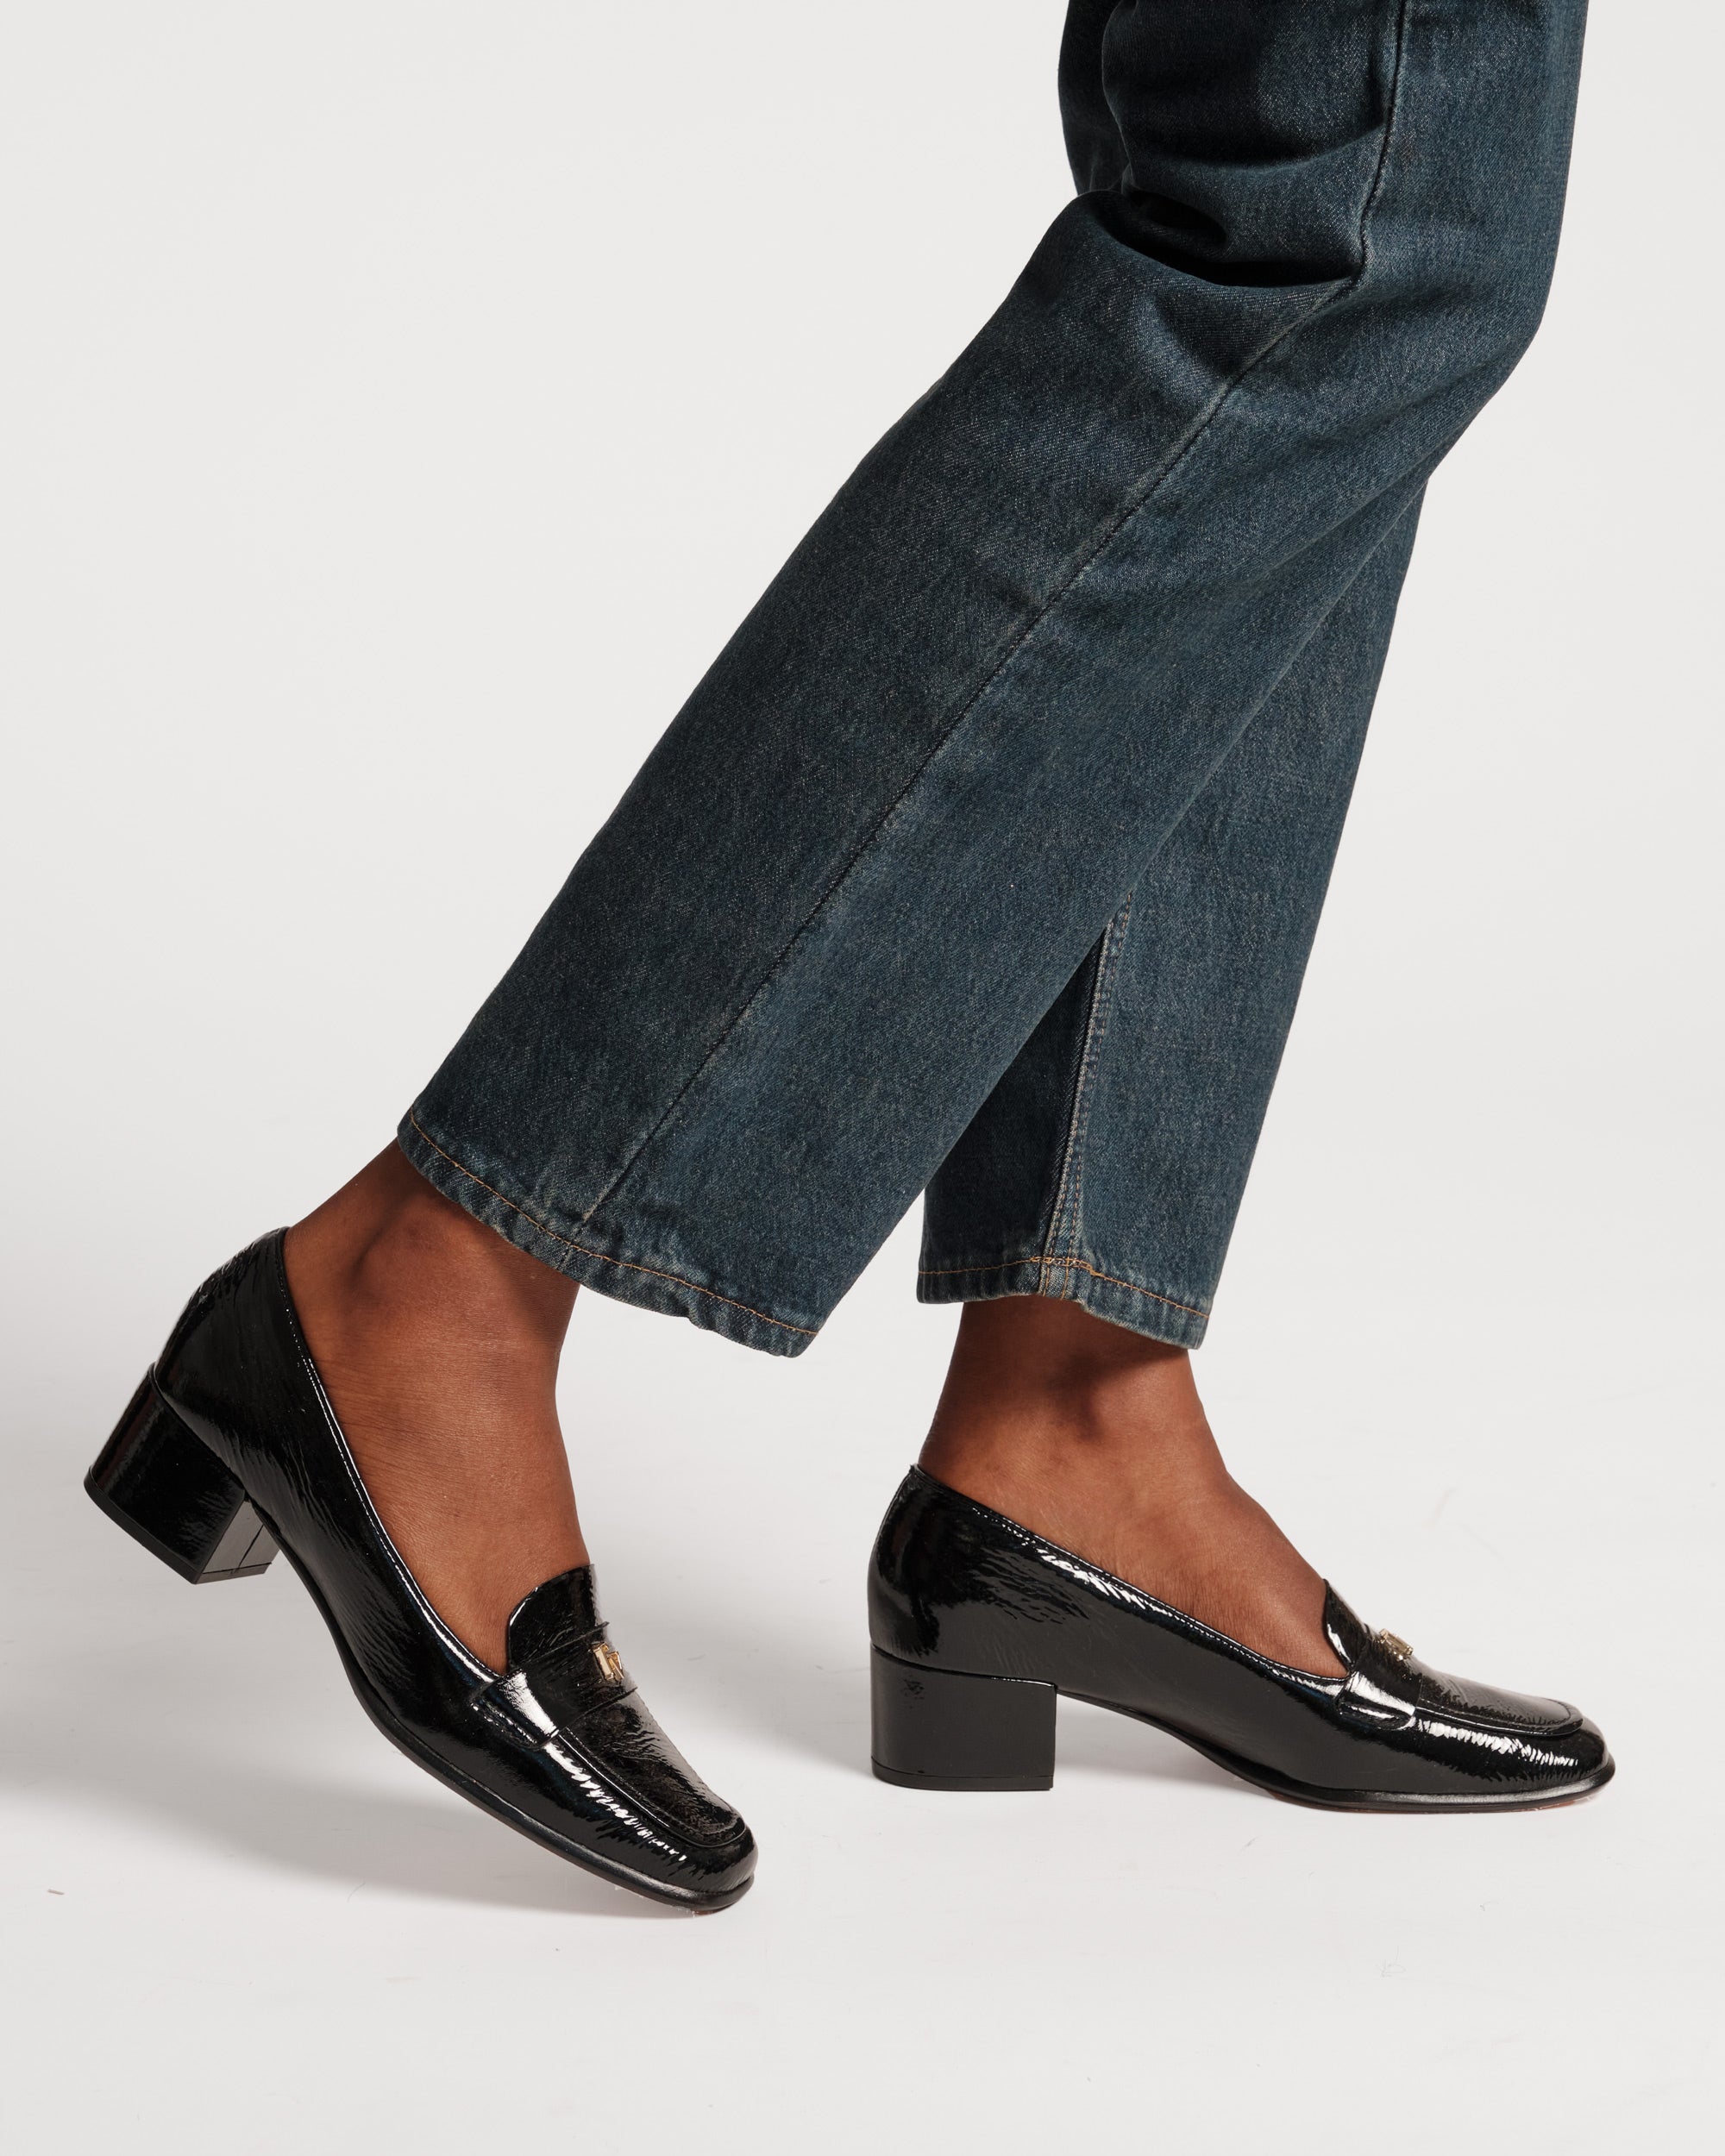 Twiggy Crinkle Soft Patent Loafer Black